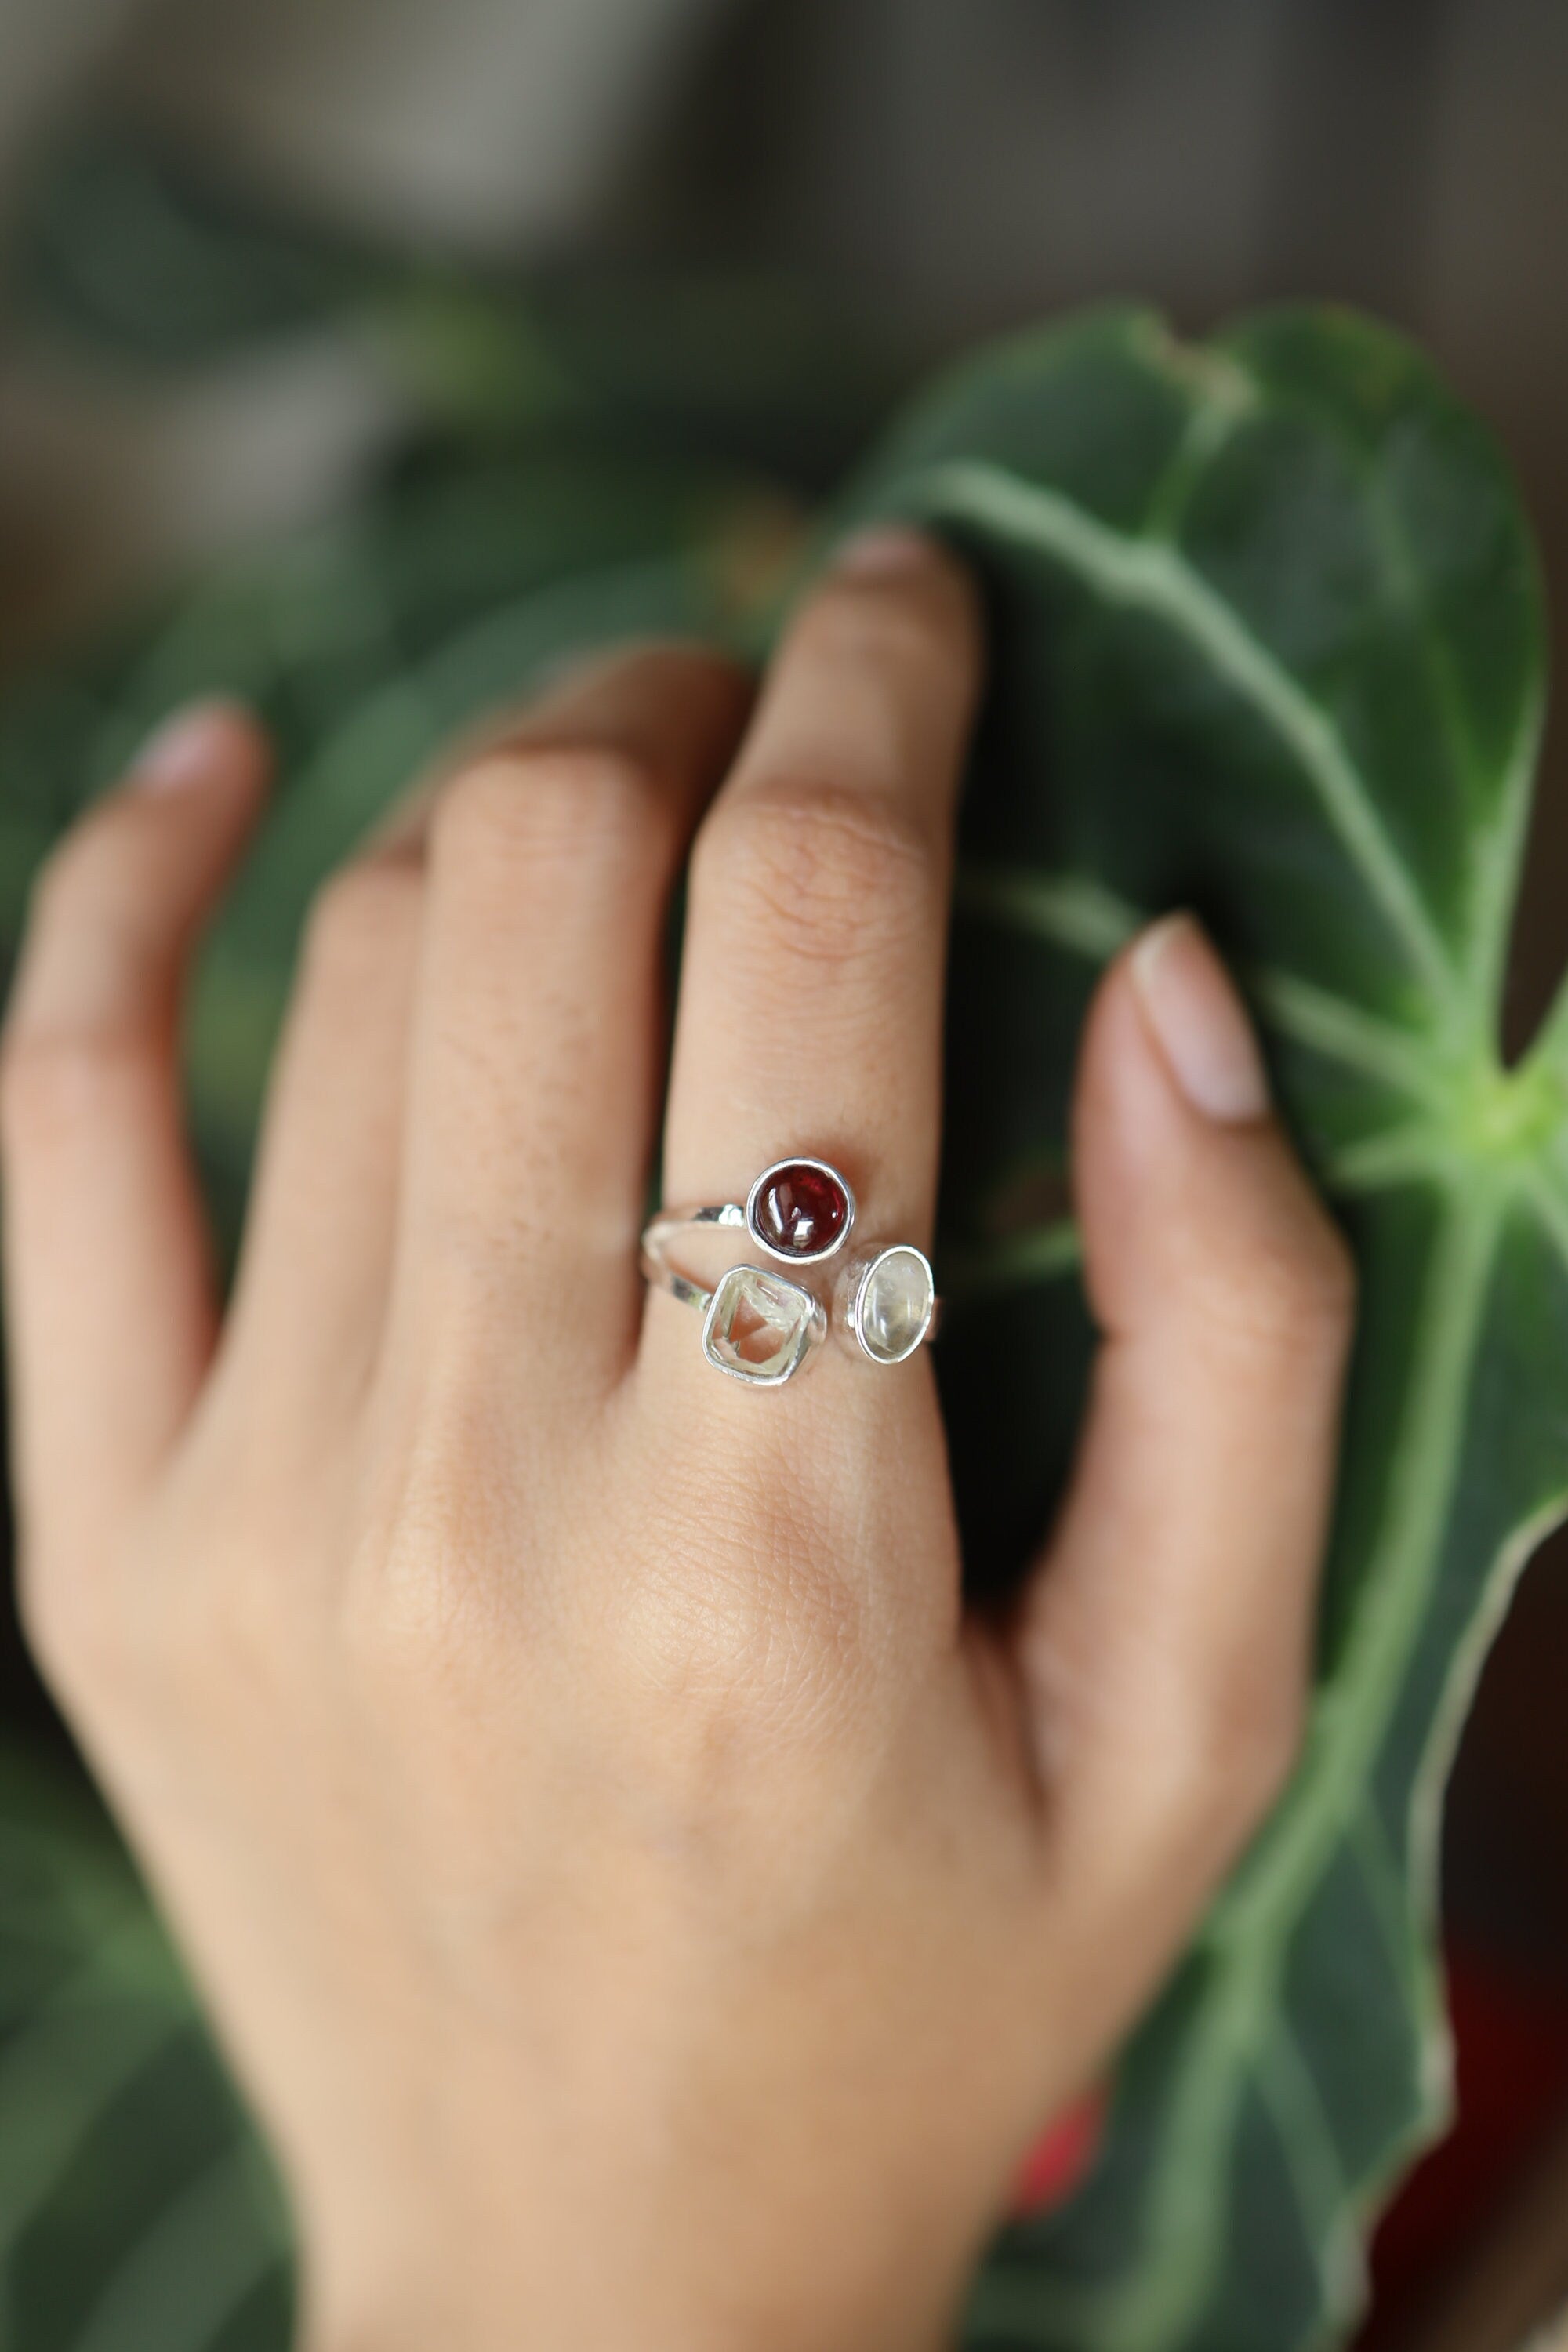 Open Adjustable Sterling Silver Ring with Garnet, Herkimer Diamond & Moonstone, Flat Hammer Textured Band, Size 5-10 US, Clarity Strength